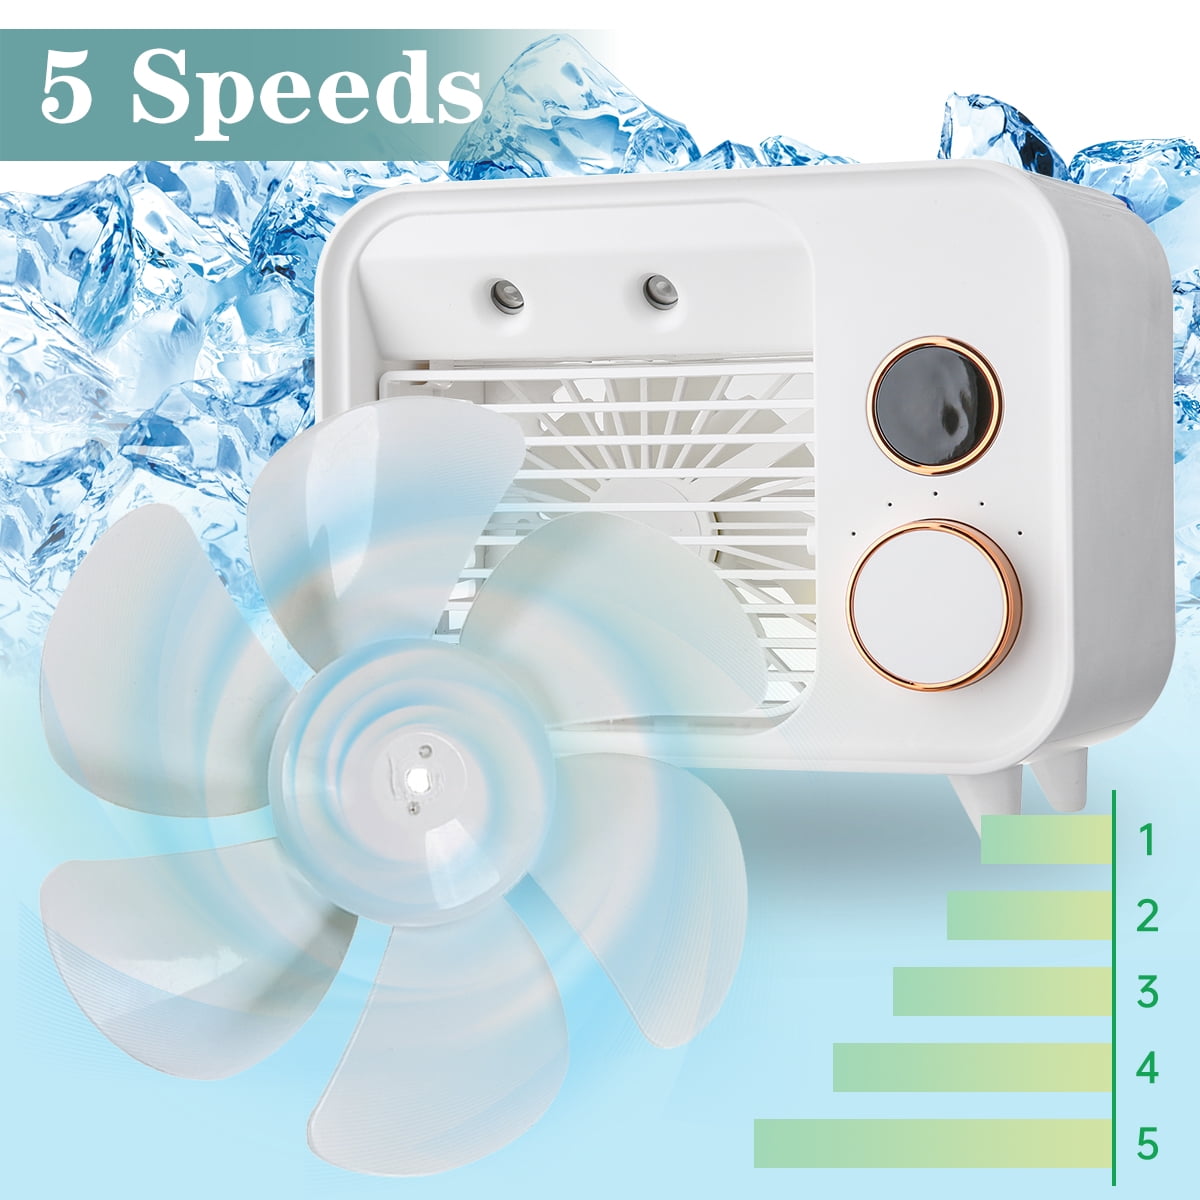 Travel 3 in 1 Evaporative Coolers Dorm Personal Air Cooler Home Jeteven Portable Mini Air Conditioner Fans Desktop Cooling Fan for Office 